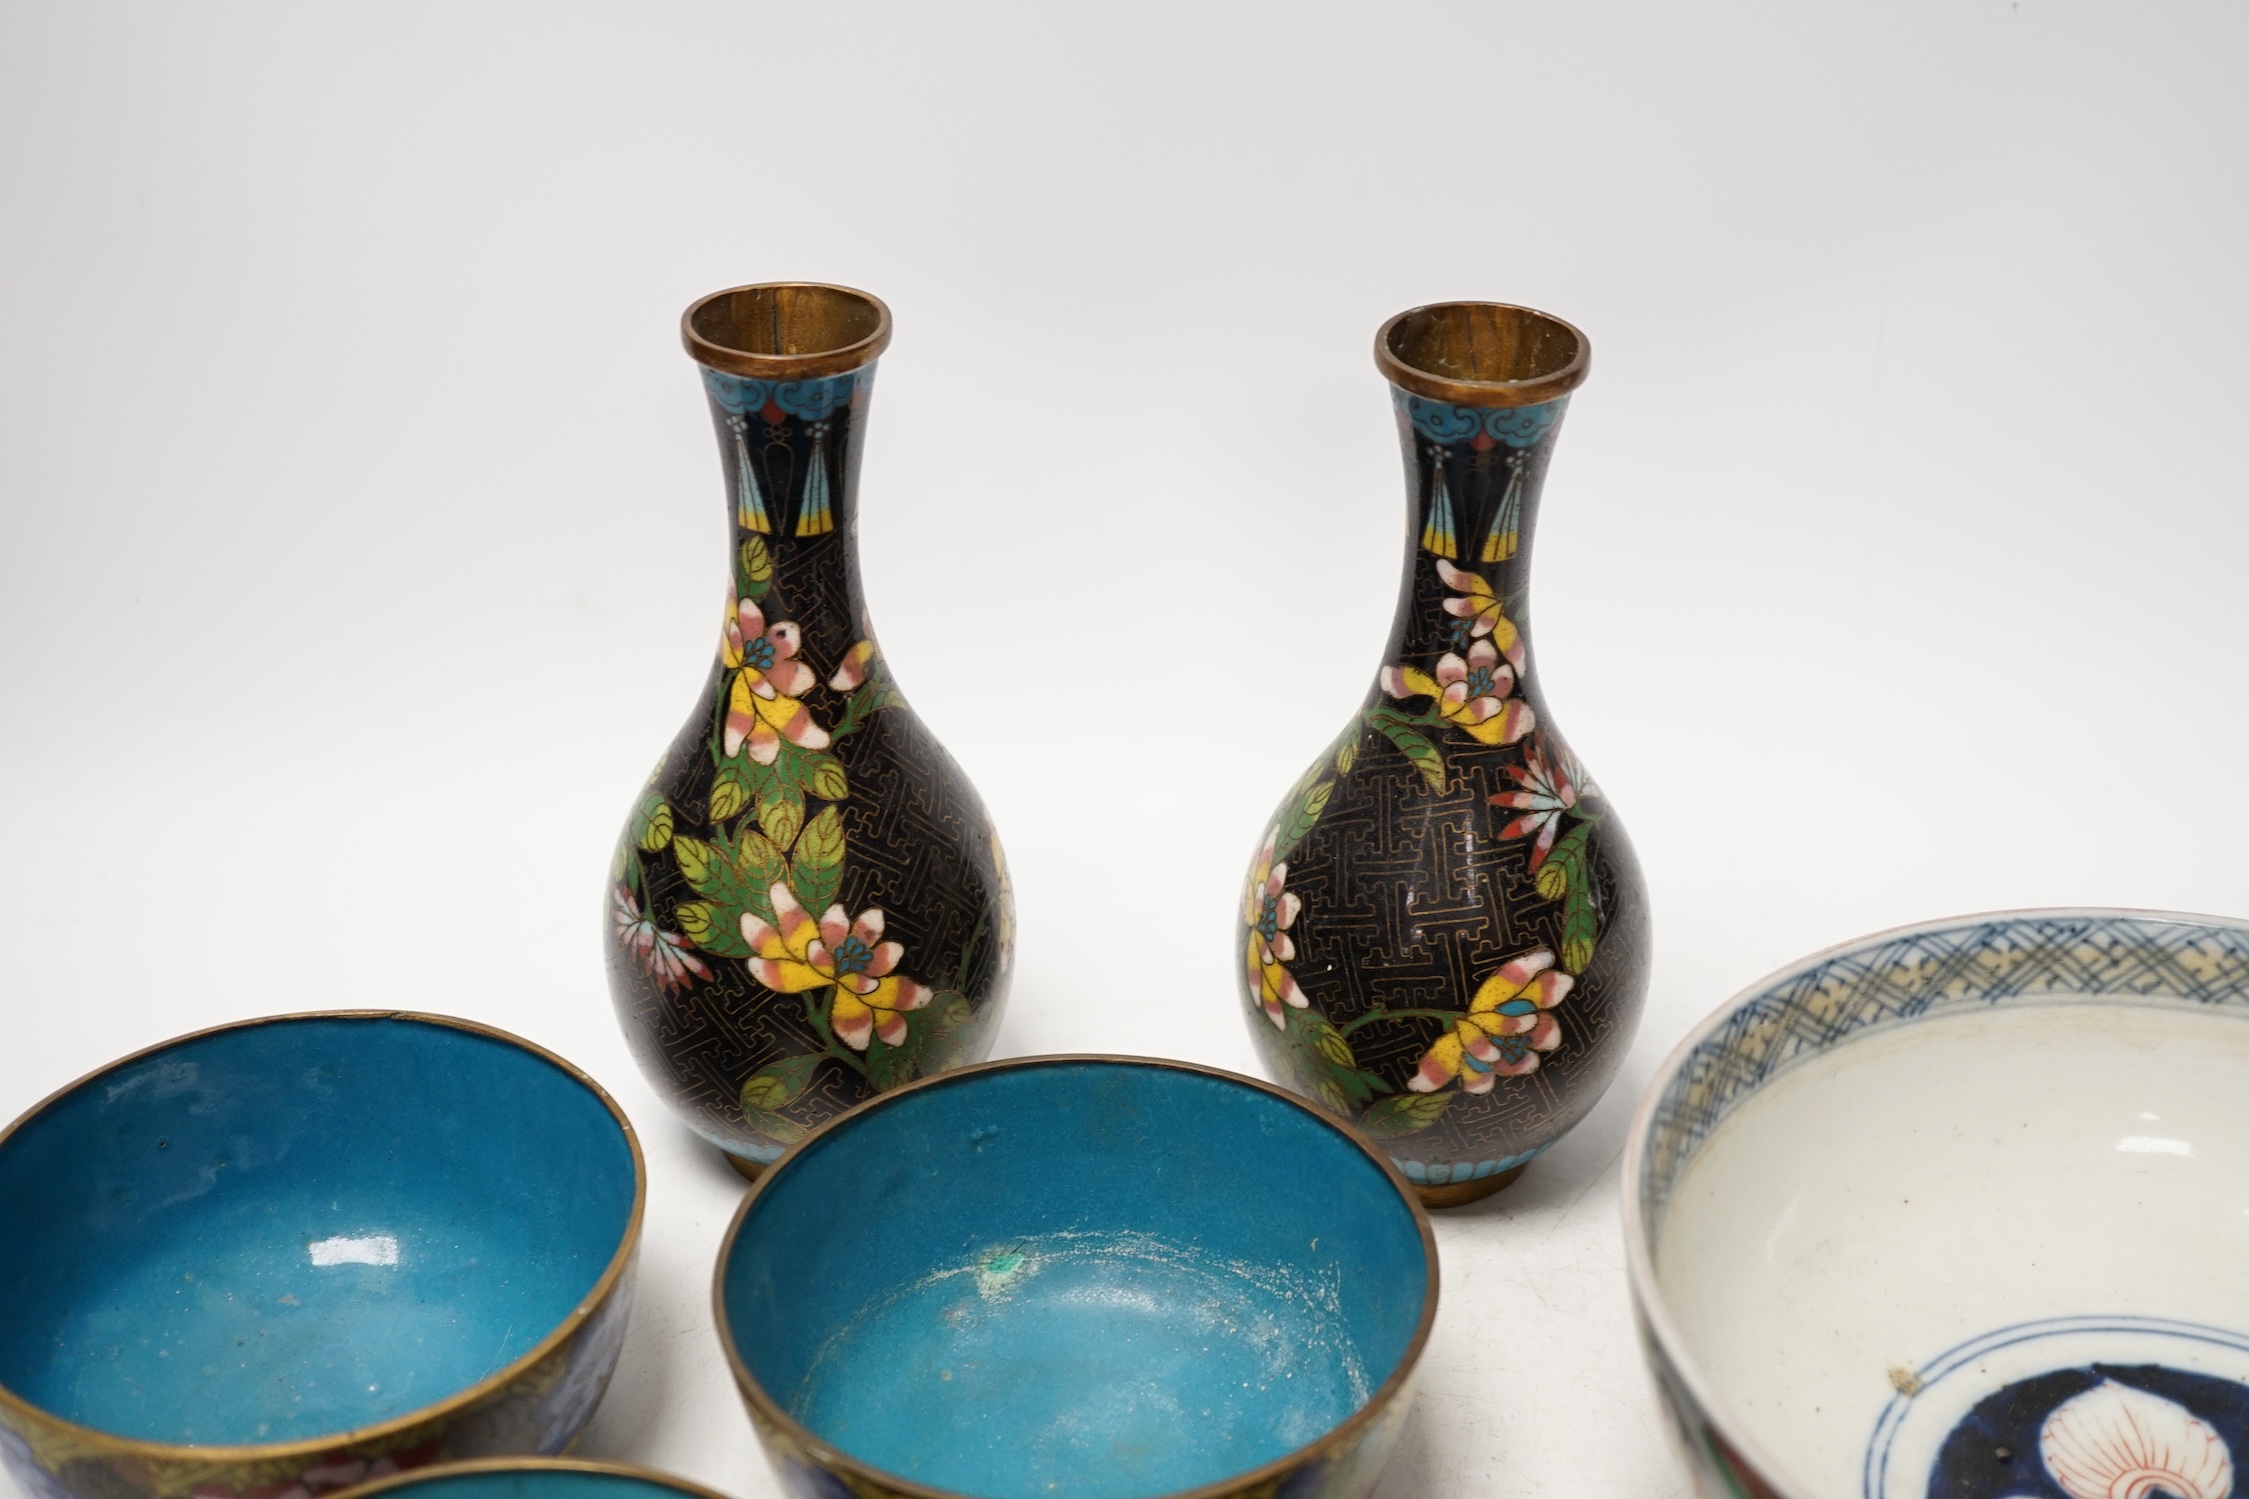 A Japanese Arita bowl and a quantity of Japanese and Chinese cloisonné enamel wares, tallest 17cm. Condition - fair